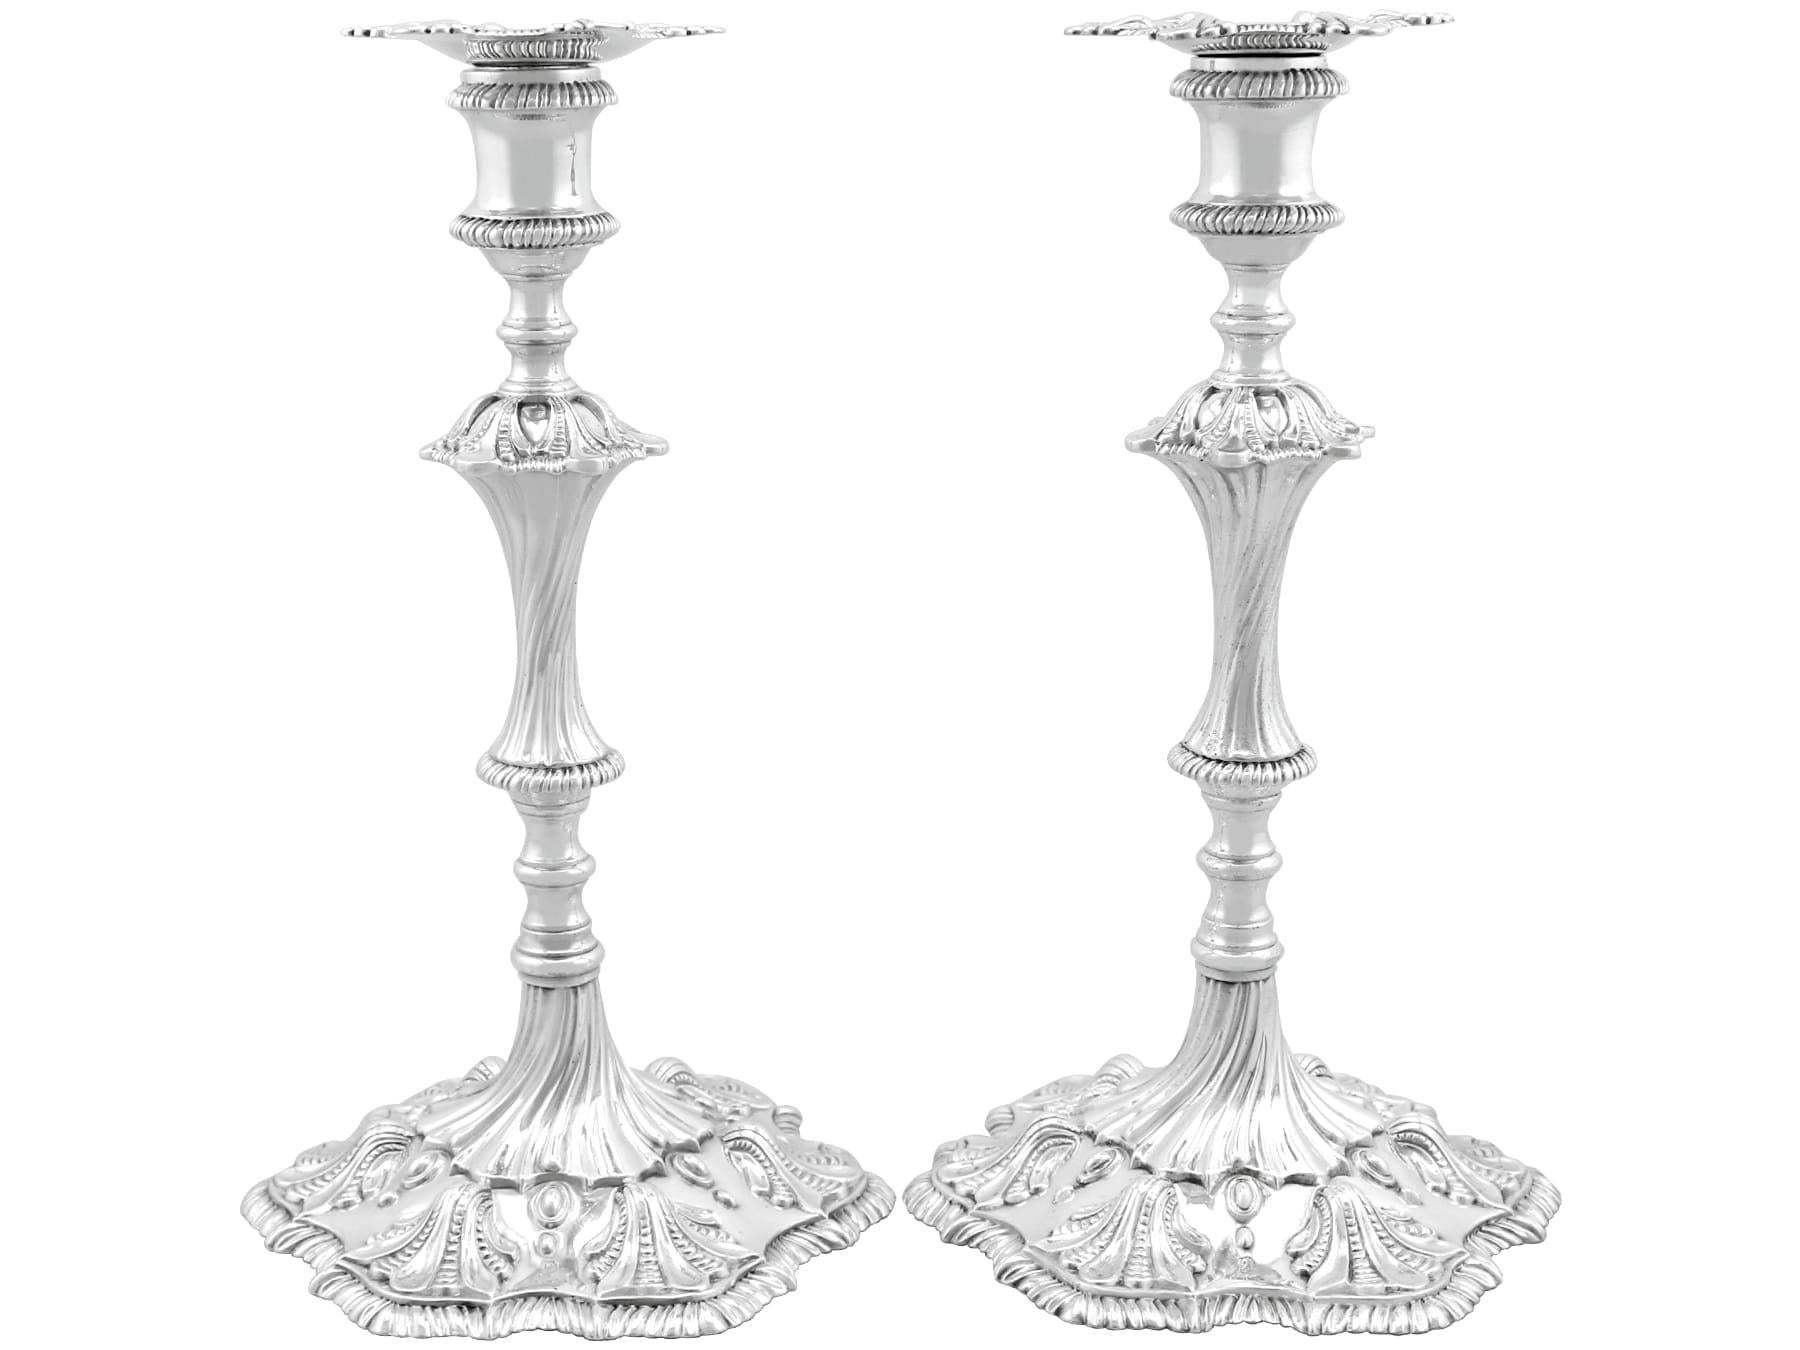 A magnificent, fine and impressive pair of antique George III English cast sterling silver candlesticks made by Edmund Vincent; an addition of our ornamental silverware collection

These magnificent antique George III cast sterling silver